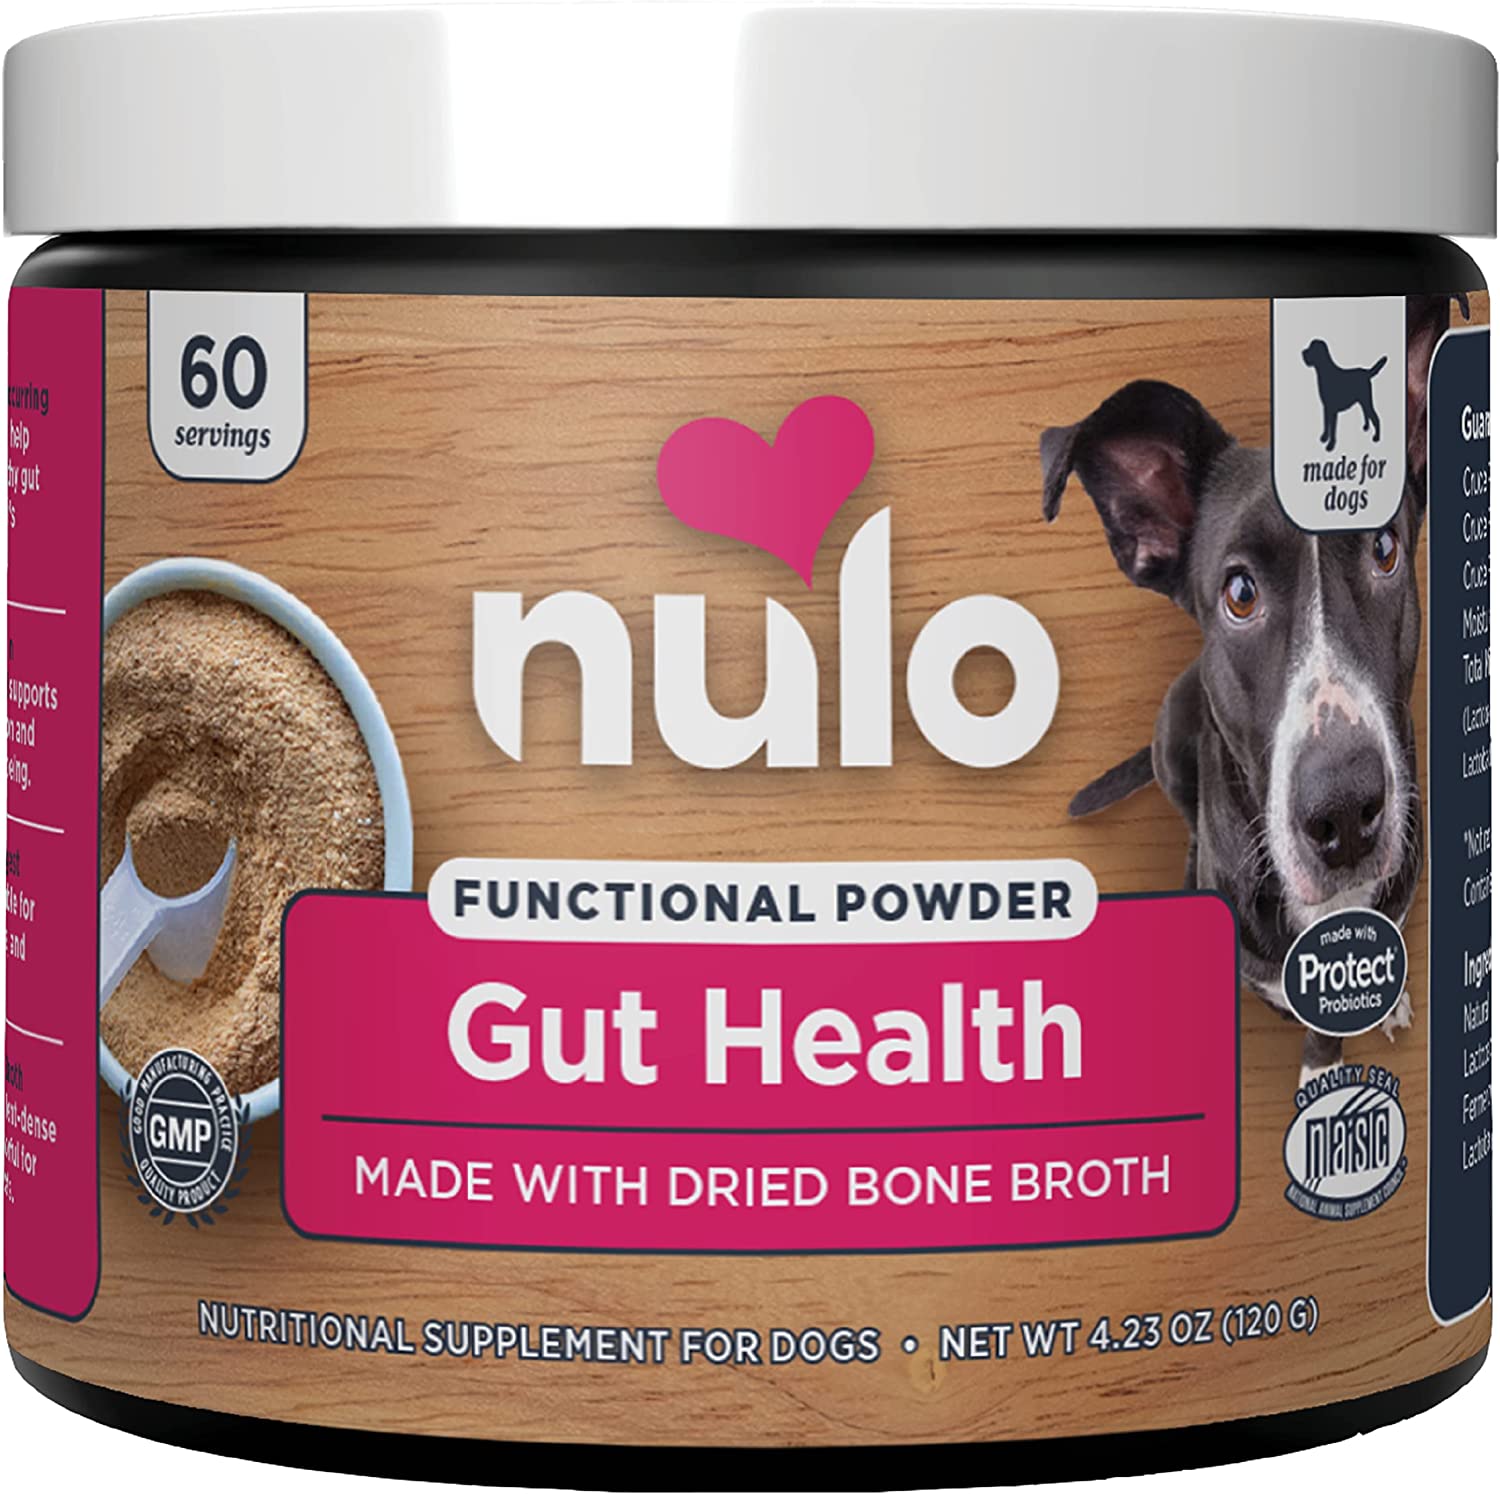 Nulo Functional Powder for Gut Health